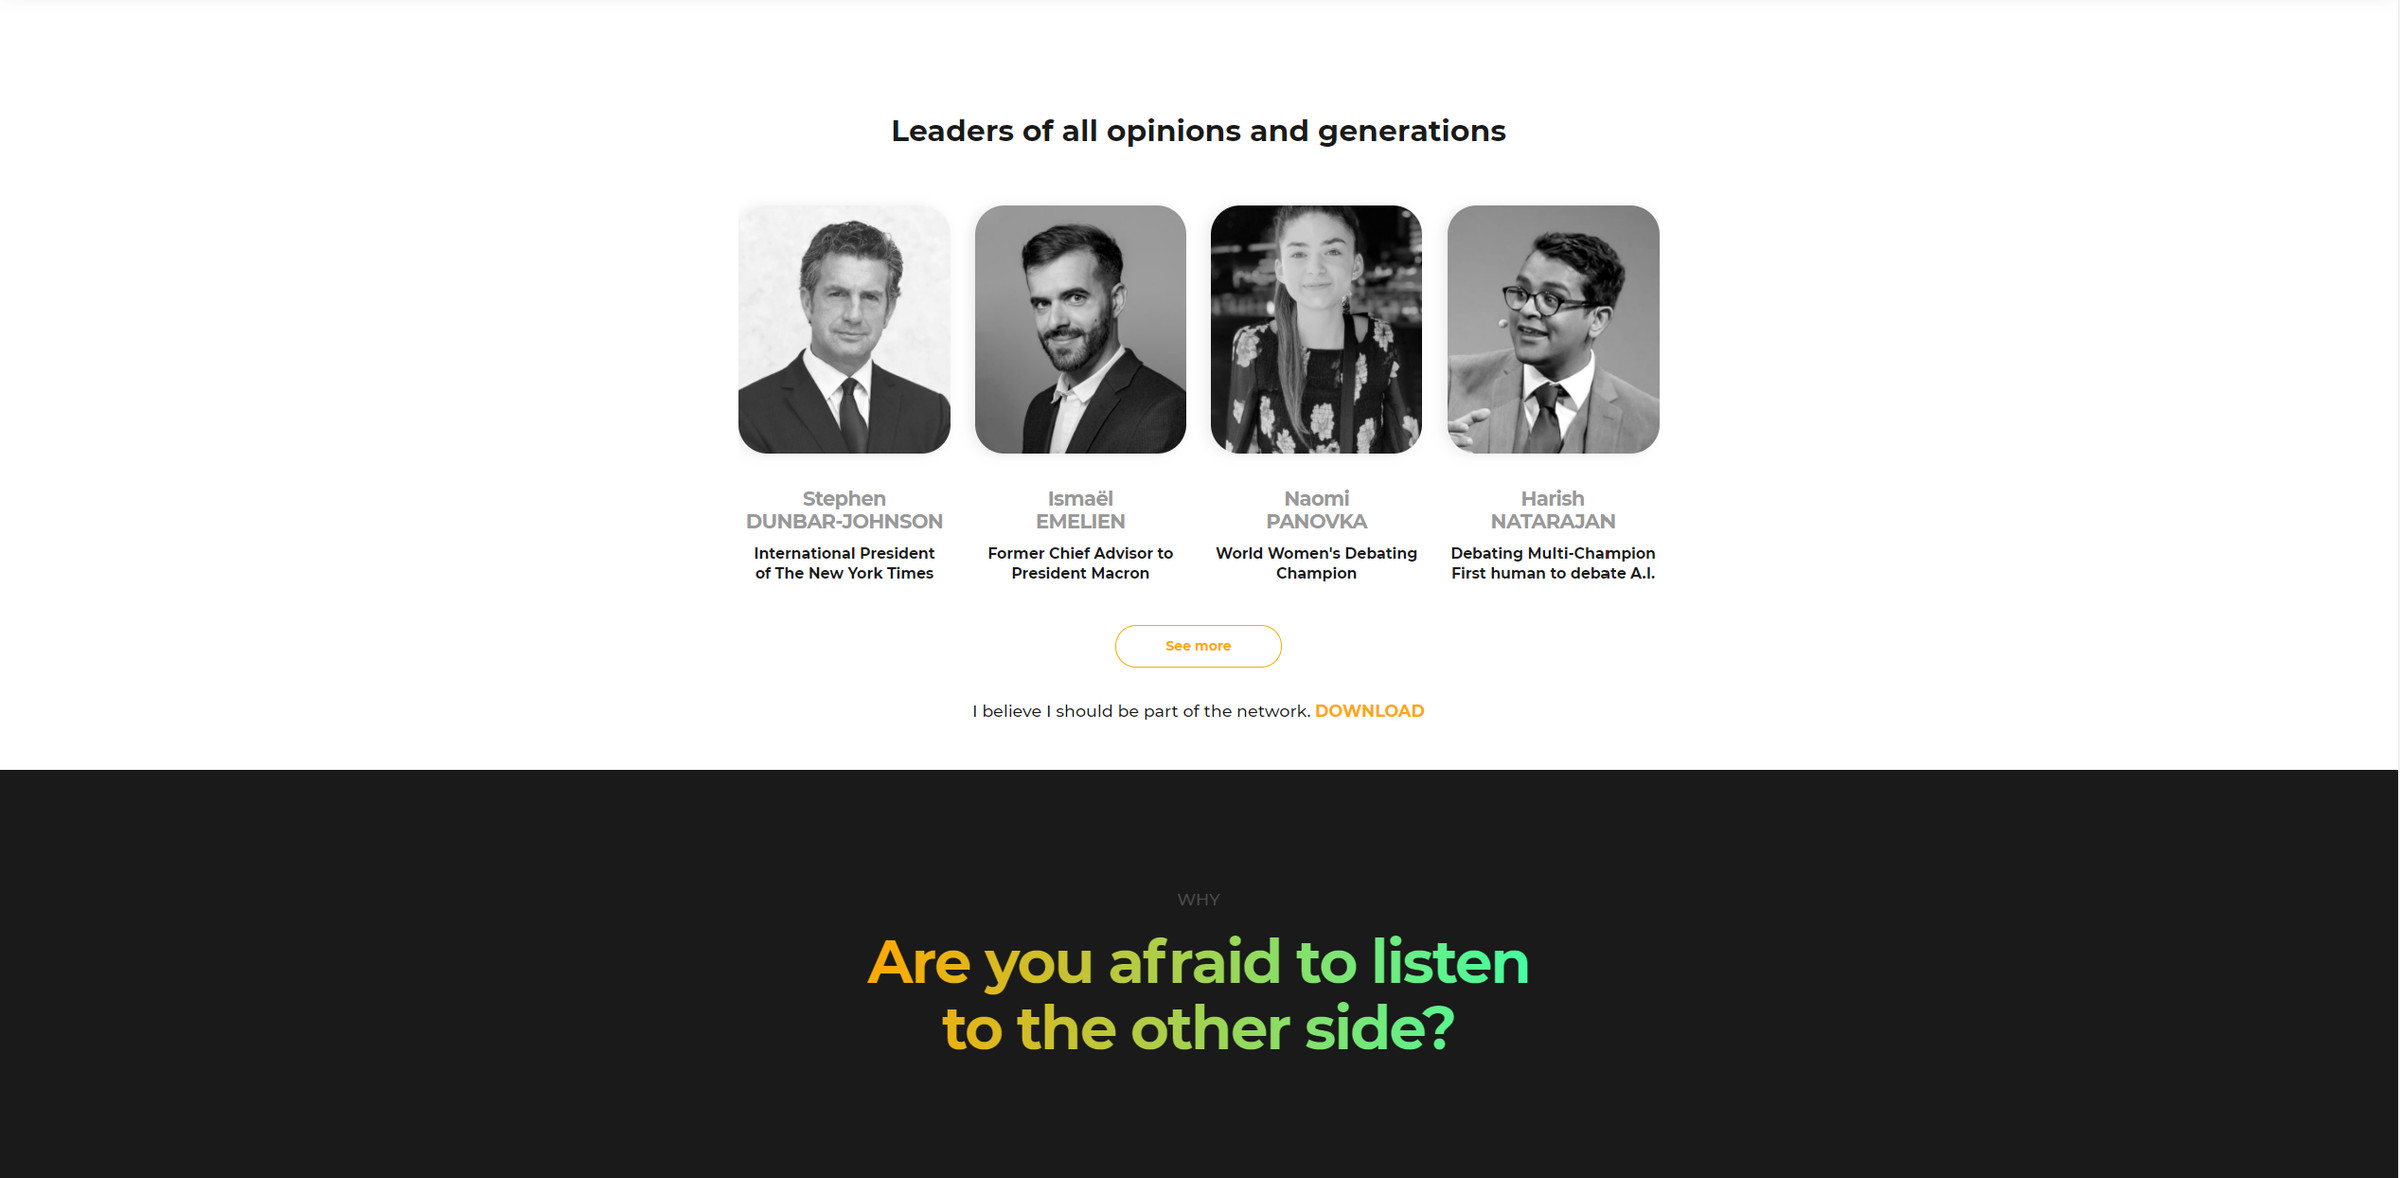 A screenshot from Polemix’s website showing four people beneath the heading “Leaders of all opinions and generations.” Below the pictures appears a question: “Are you afraid to listen to the other side?”